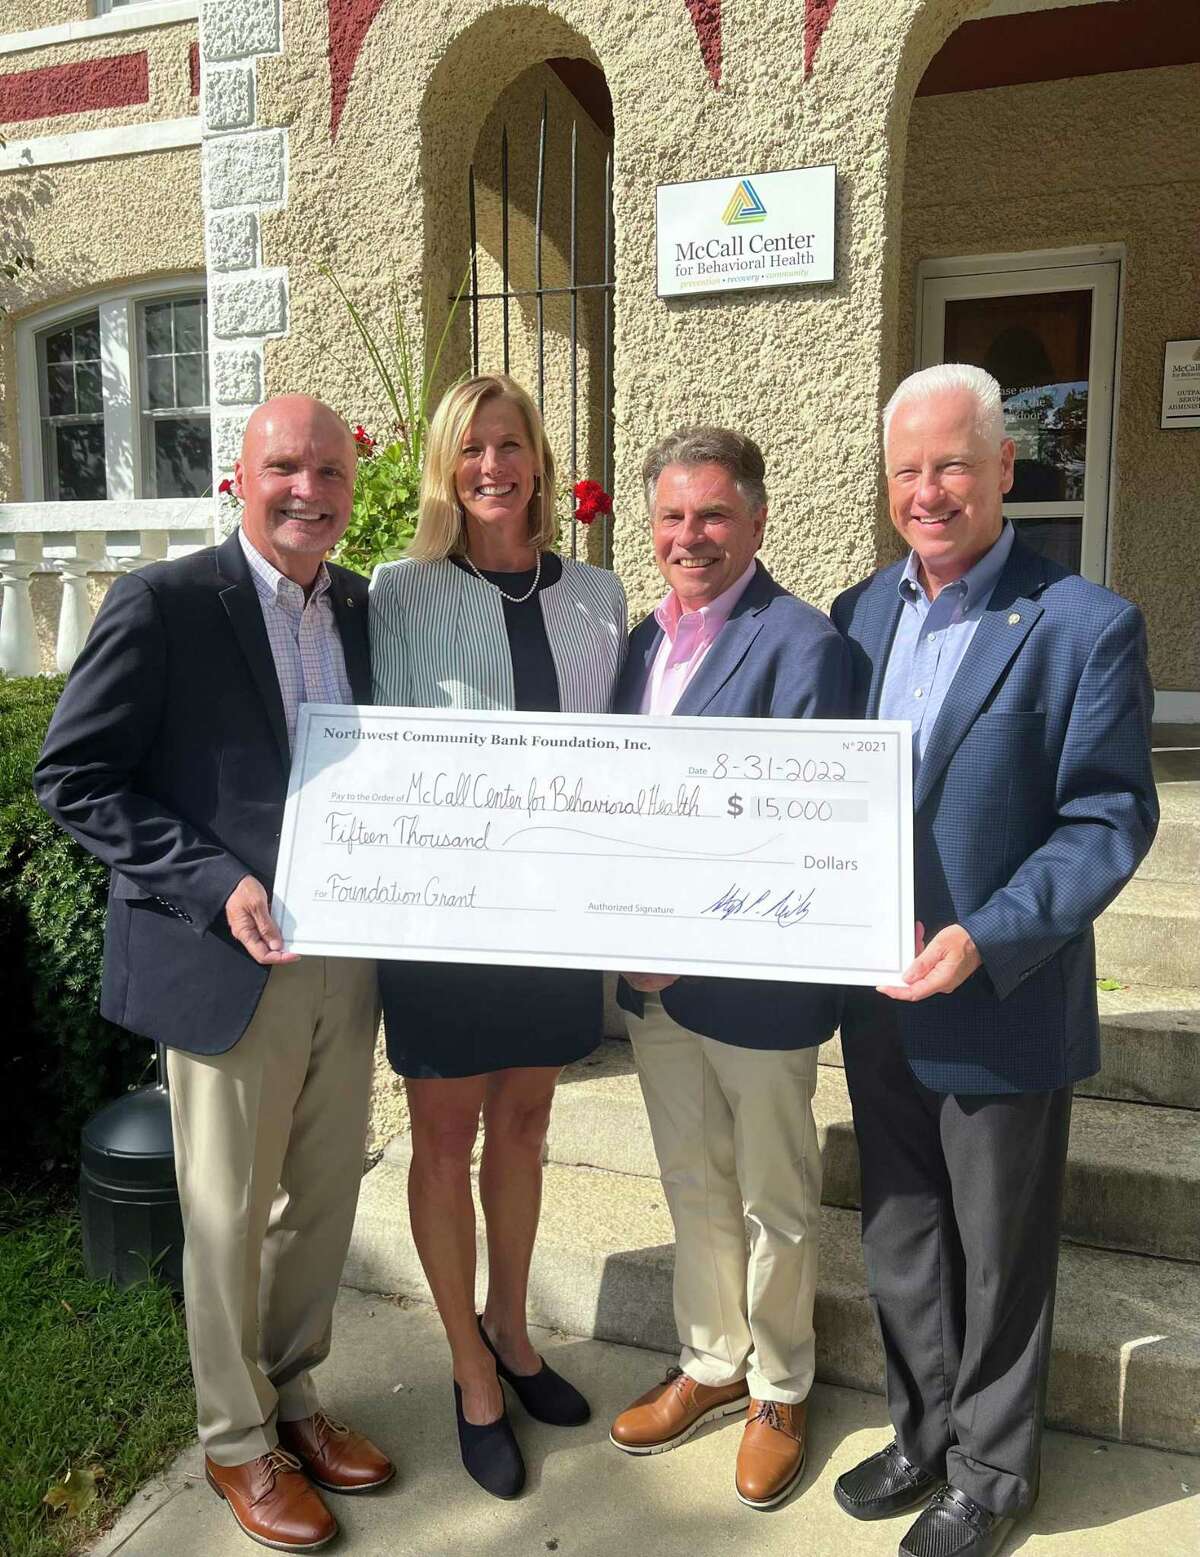 In its first grant cycle, Northwest Community Bank Foundation awarded $15,000 to McCall Center for Behavioral Health for website development. From left are Foundation Vice President Paul McLaughlin; McCall Foundation Chief Executive Officer Maria Coutant Skinner; Foundation Chair of the Board Alan Colavecchio; and Foundation President Stephen Reilly. XXX In its first two grant cycles, Northwest Community Bank Foundation awarded a total of $50,000 to Northwest CT YMCA for its sports field in Torrington. From left are Foundation Vice President Paul McLaughlin; Northwest Y Chief Executive Officer Greg Brisco; Foundation Chair of the Board Alan Colavecchio; and Foundation President Stephen Reilly.